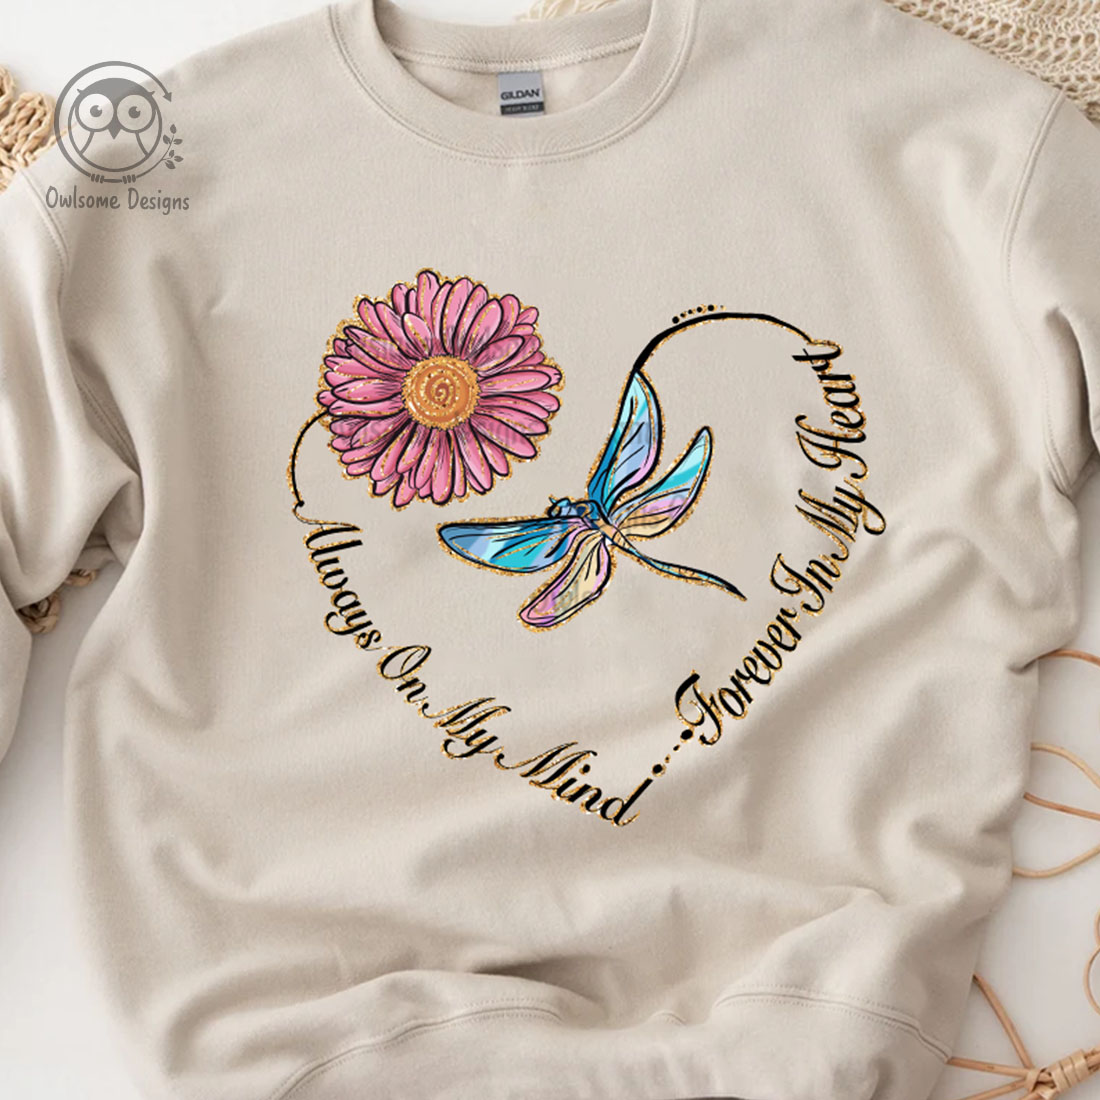 Image of a sweatshirt with a gorgeous dragonfly and heart-shaped flower print.